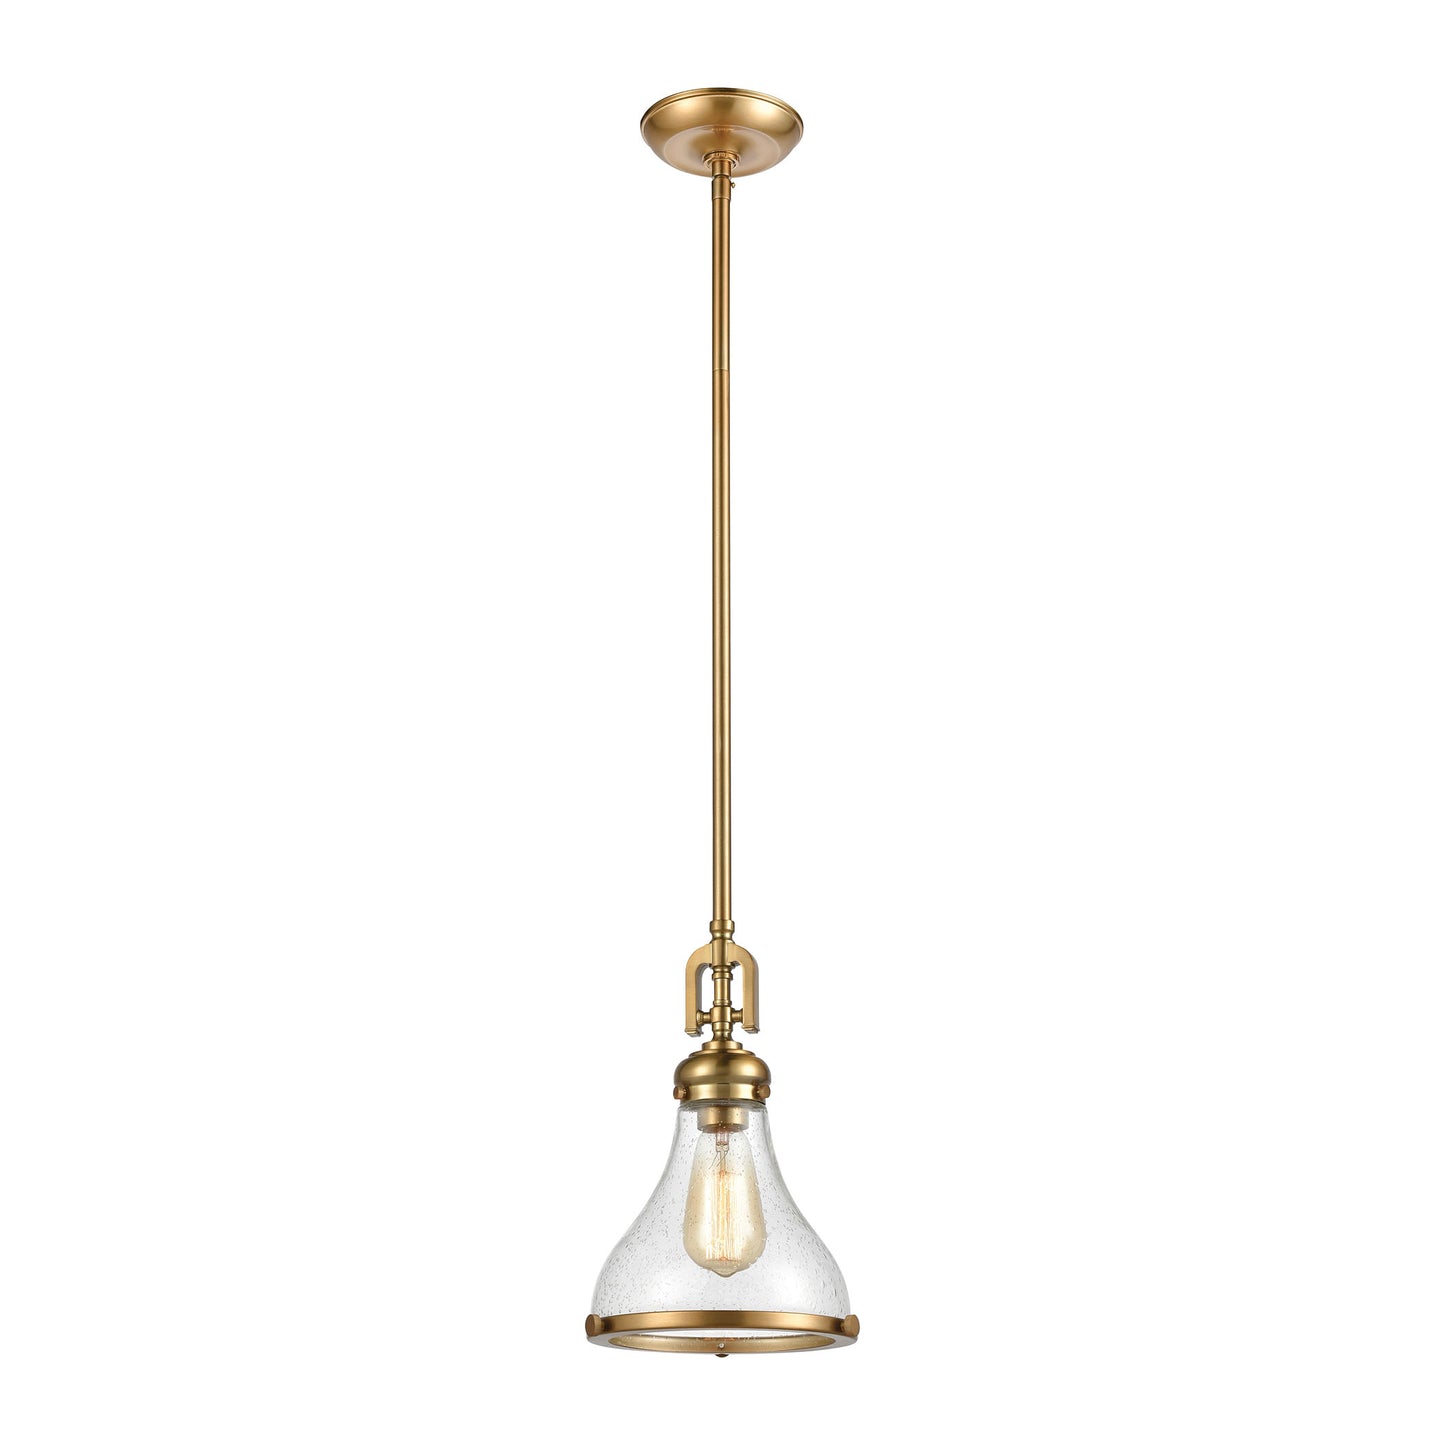 ELK Lighting 57370/1 - Rutherford 9" Wide 1-Light Mini Pendant in Satin Brass with Seedy Glass